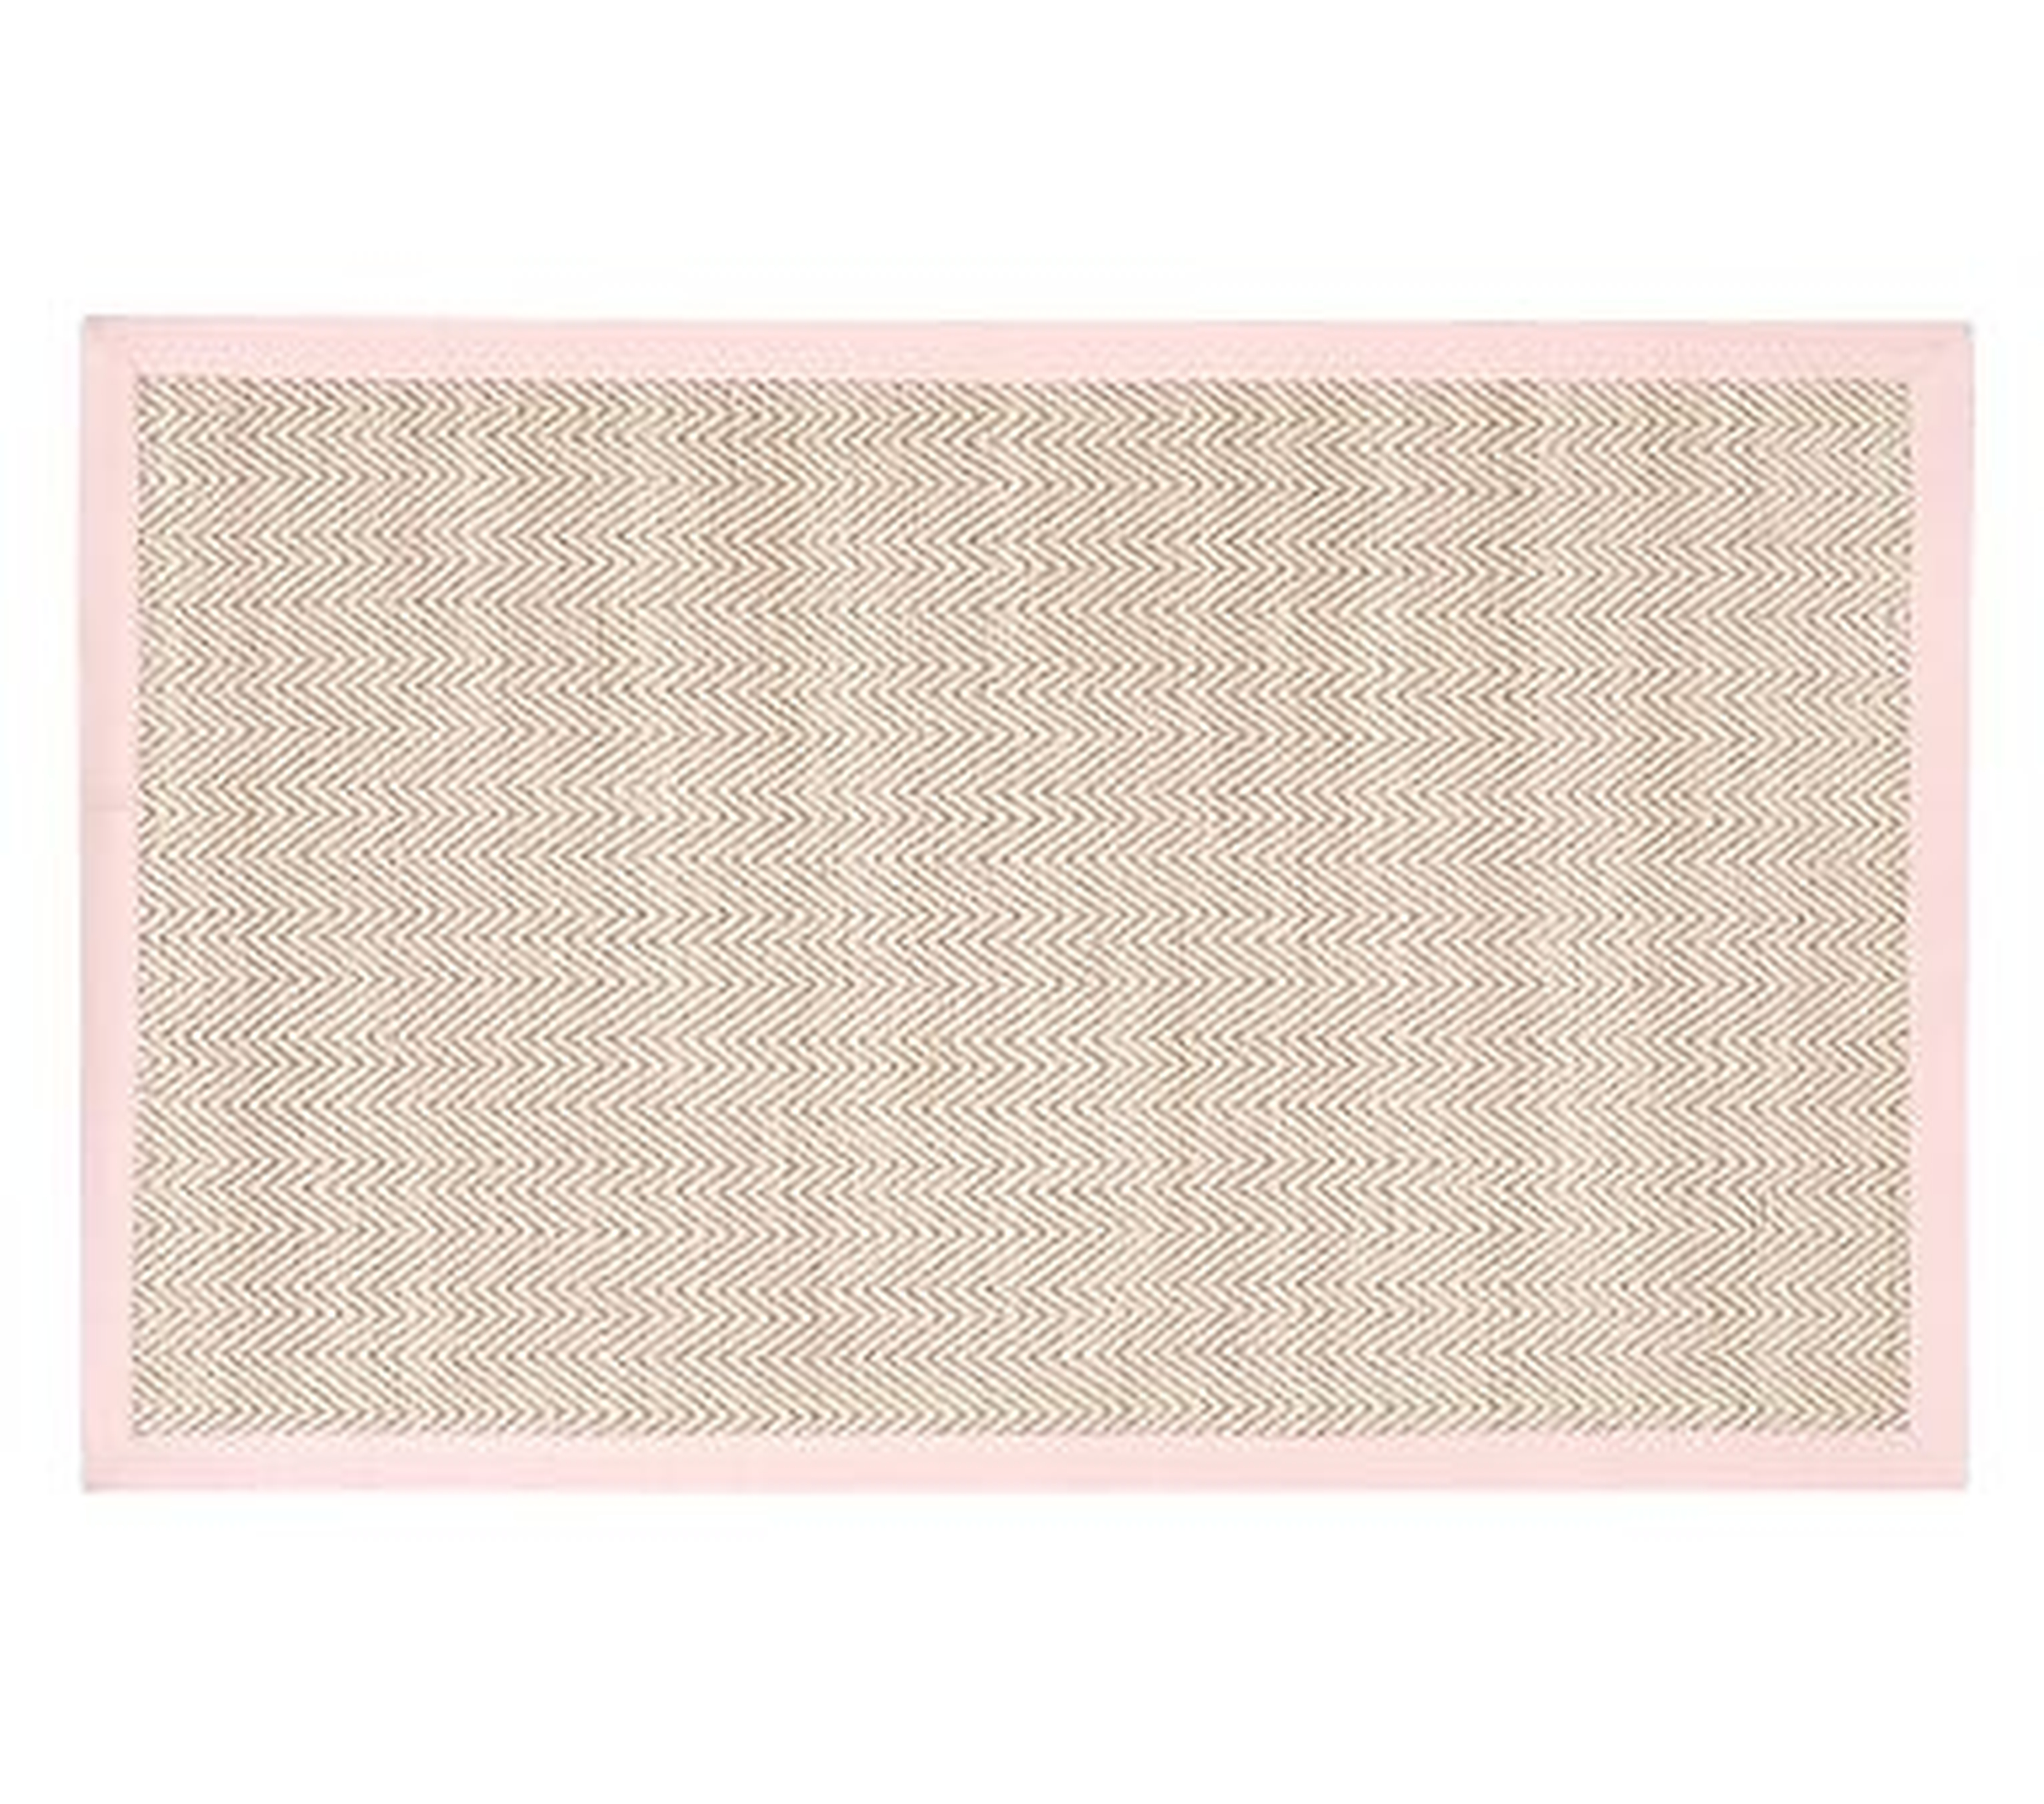 Chenille Jute Thick Solid Border Rug, 8x10 Feet, Light Pink - Pottery Barn Kids